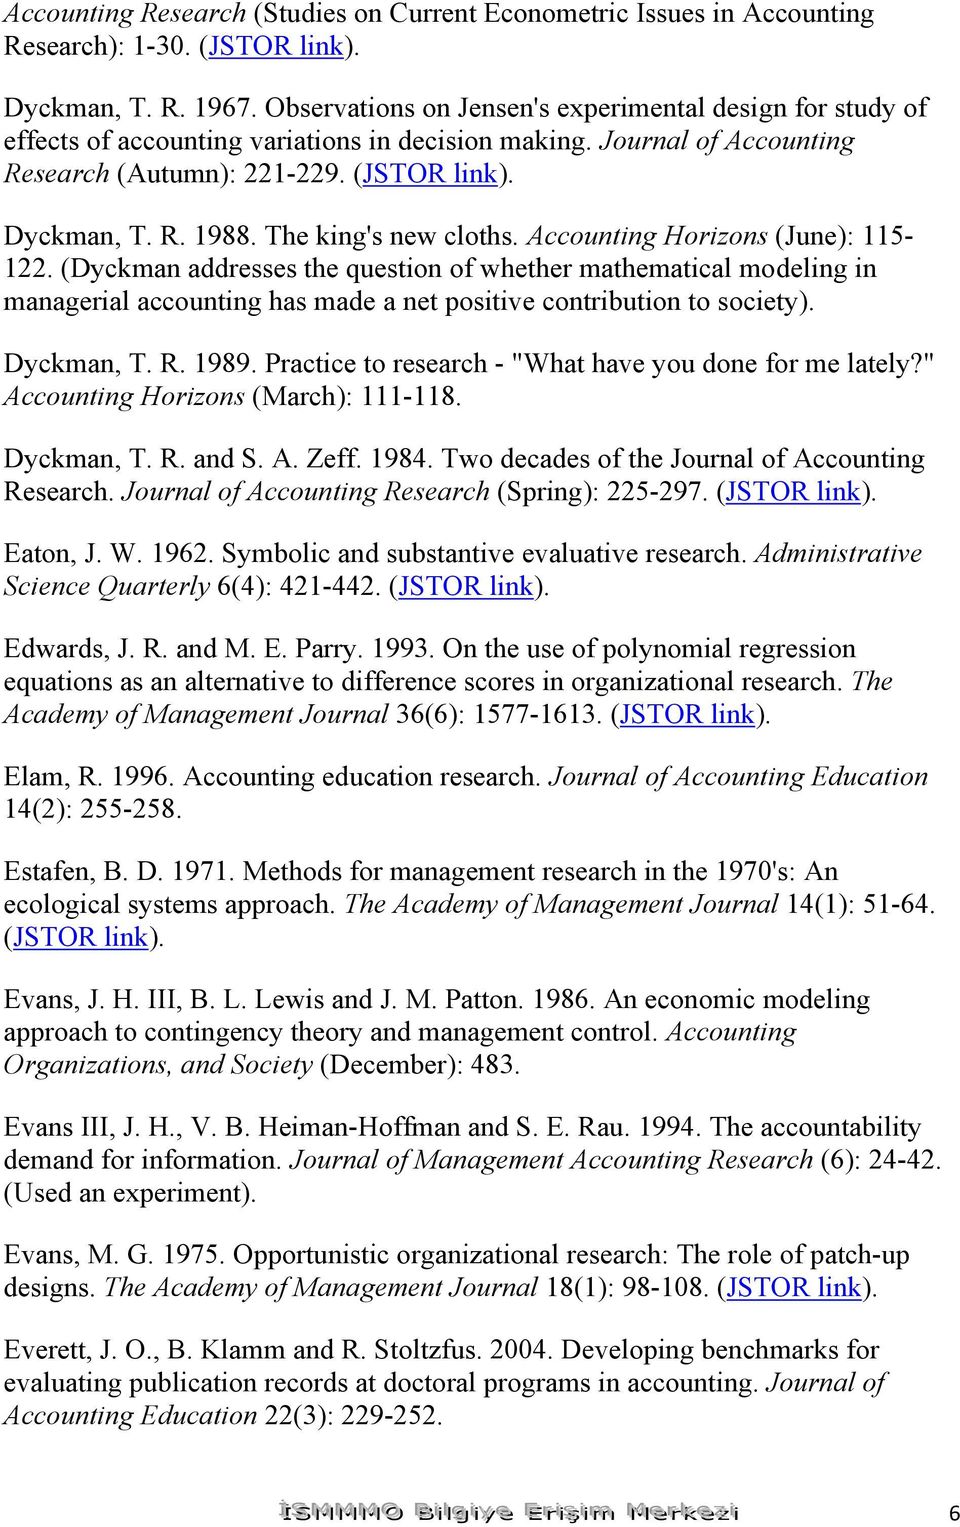 The king's new cloths. Accounting Horizons (June): 115-122. (Dyckman addresses the question of whether mathematical modeling in managerial accounting has made a net positive contribution to society).